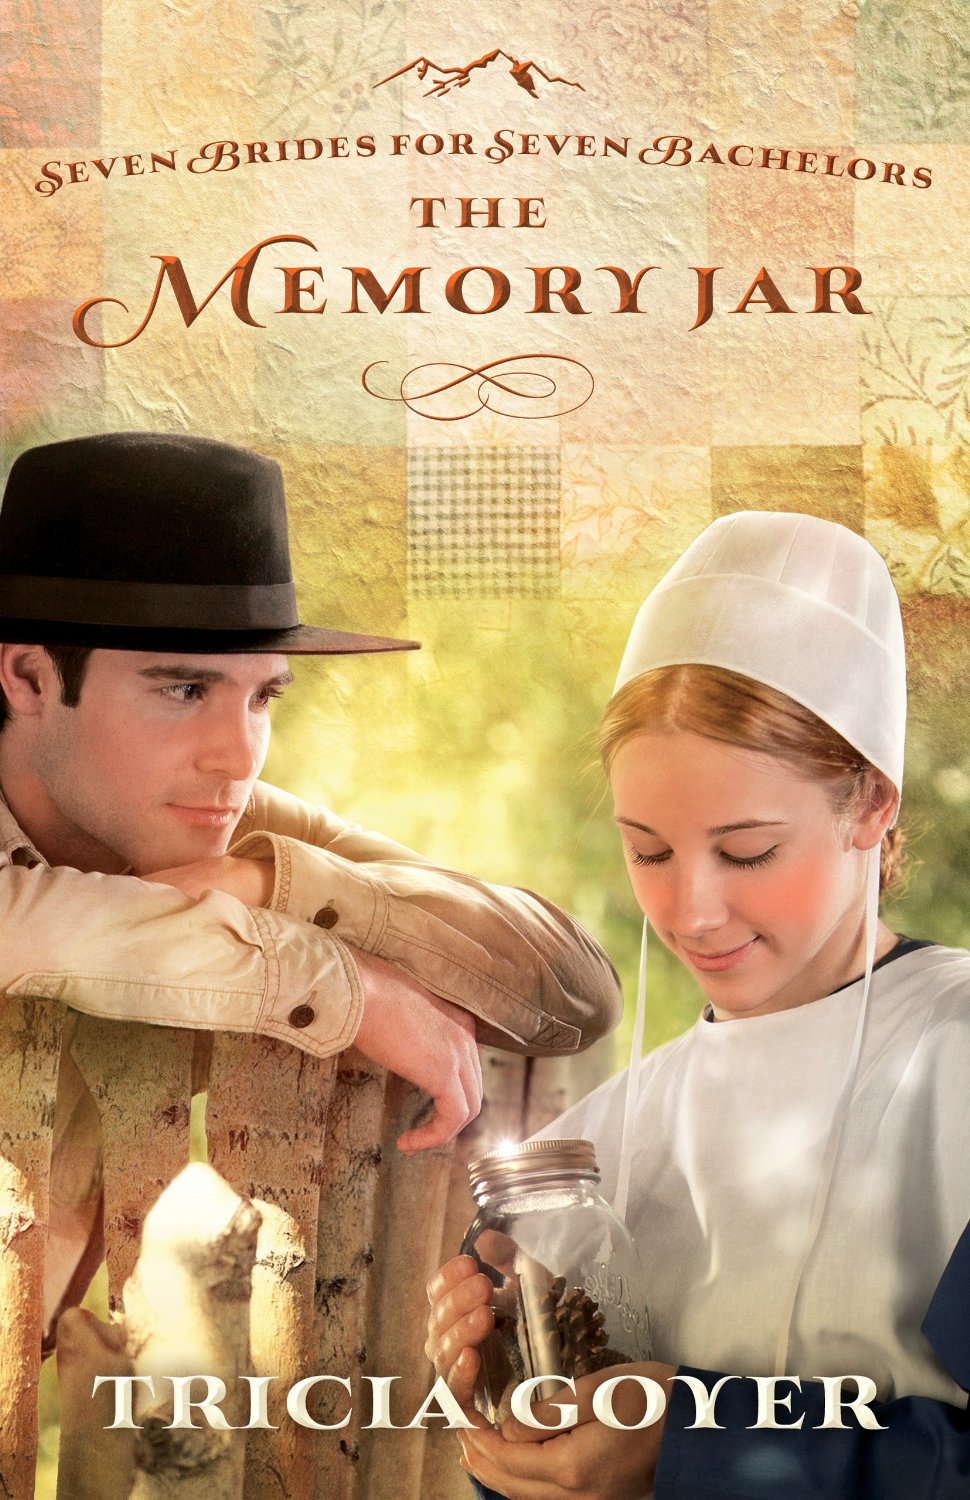 Summer Book Club for Moms Check-In #1: The Memory Jar